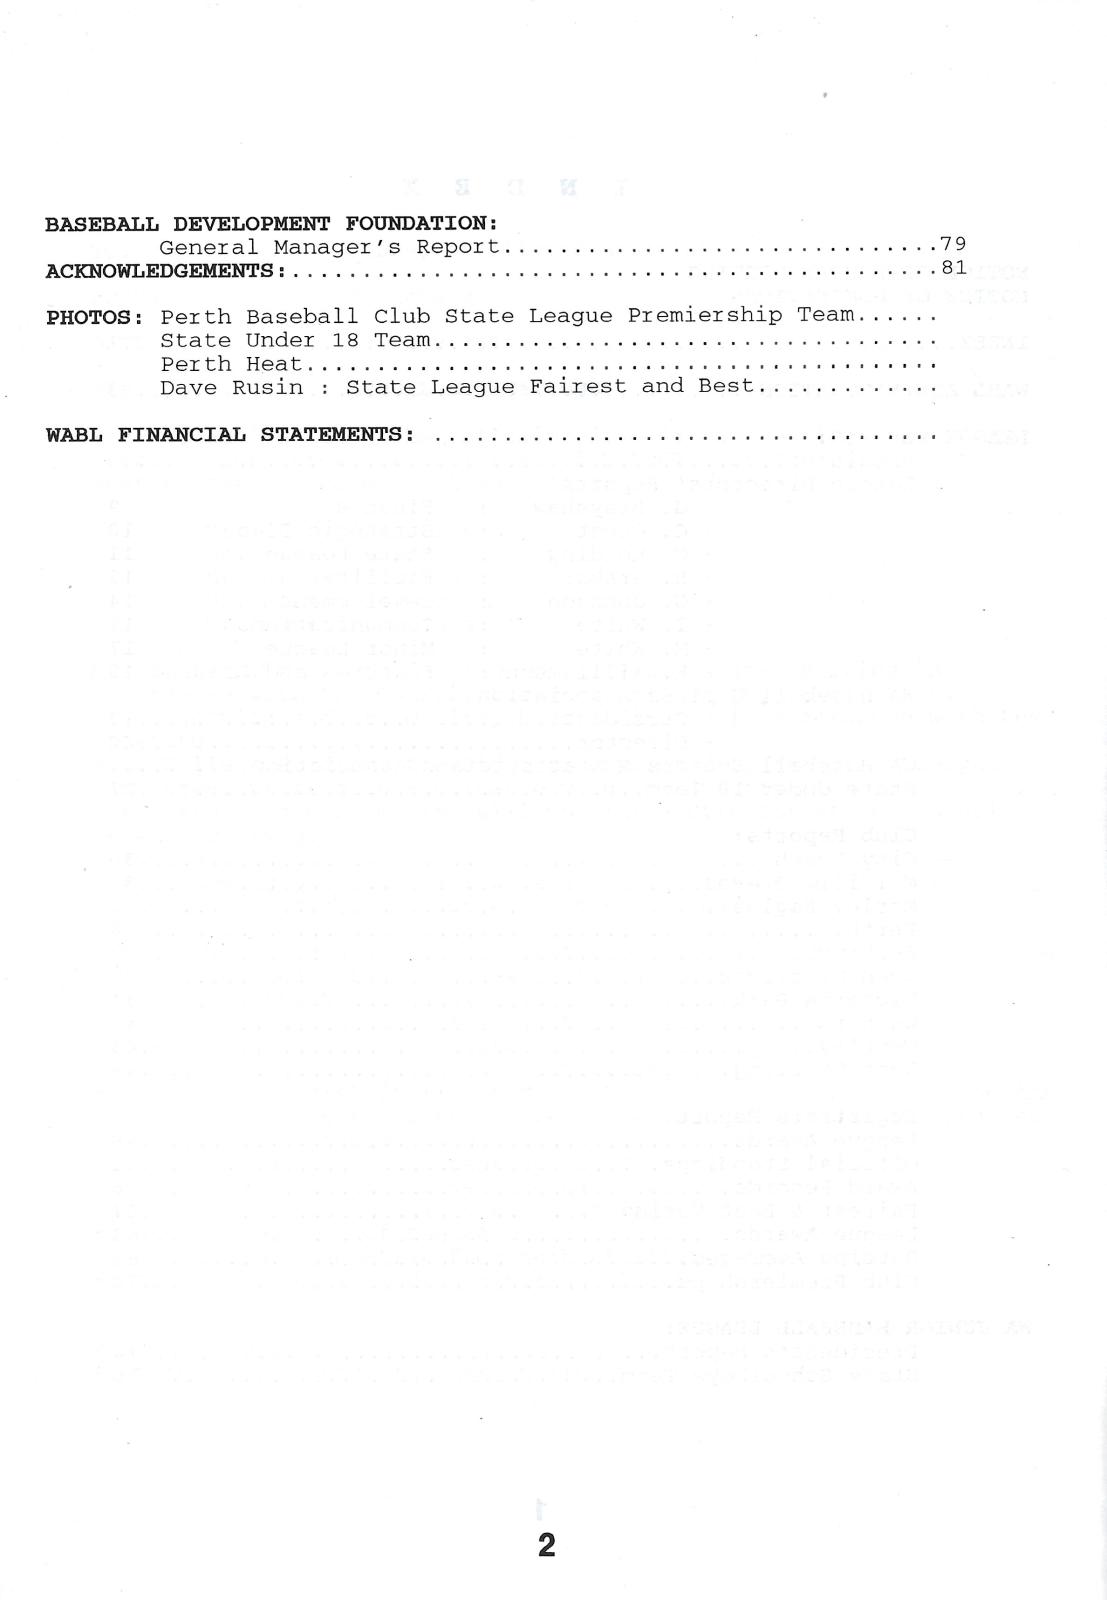 West Australian Baseball League 59th Annual Report 1993-94 index page 2